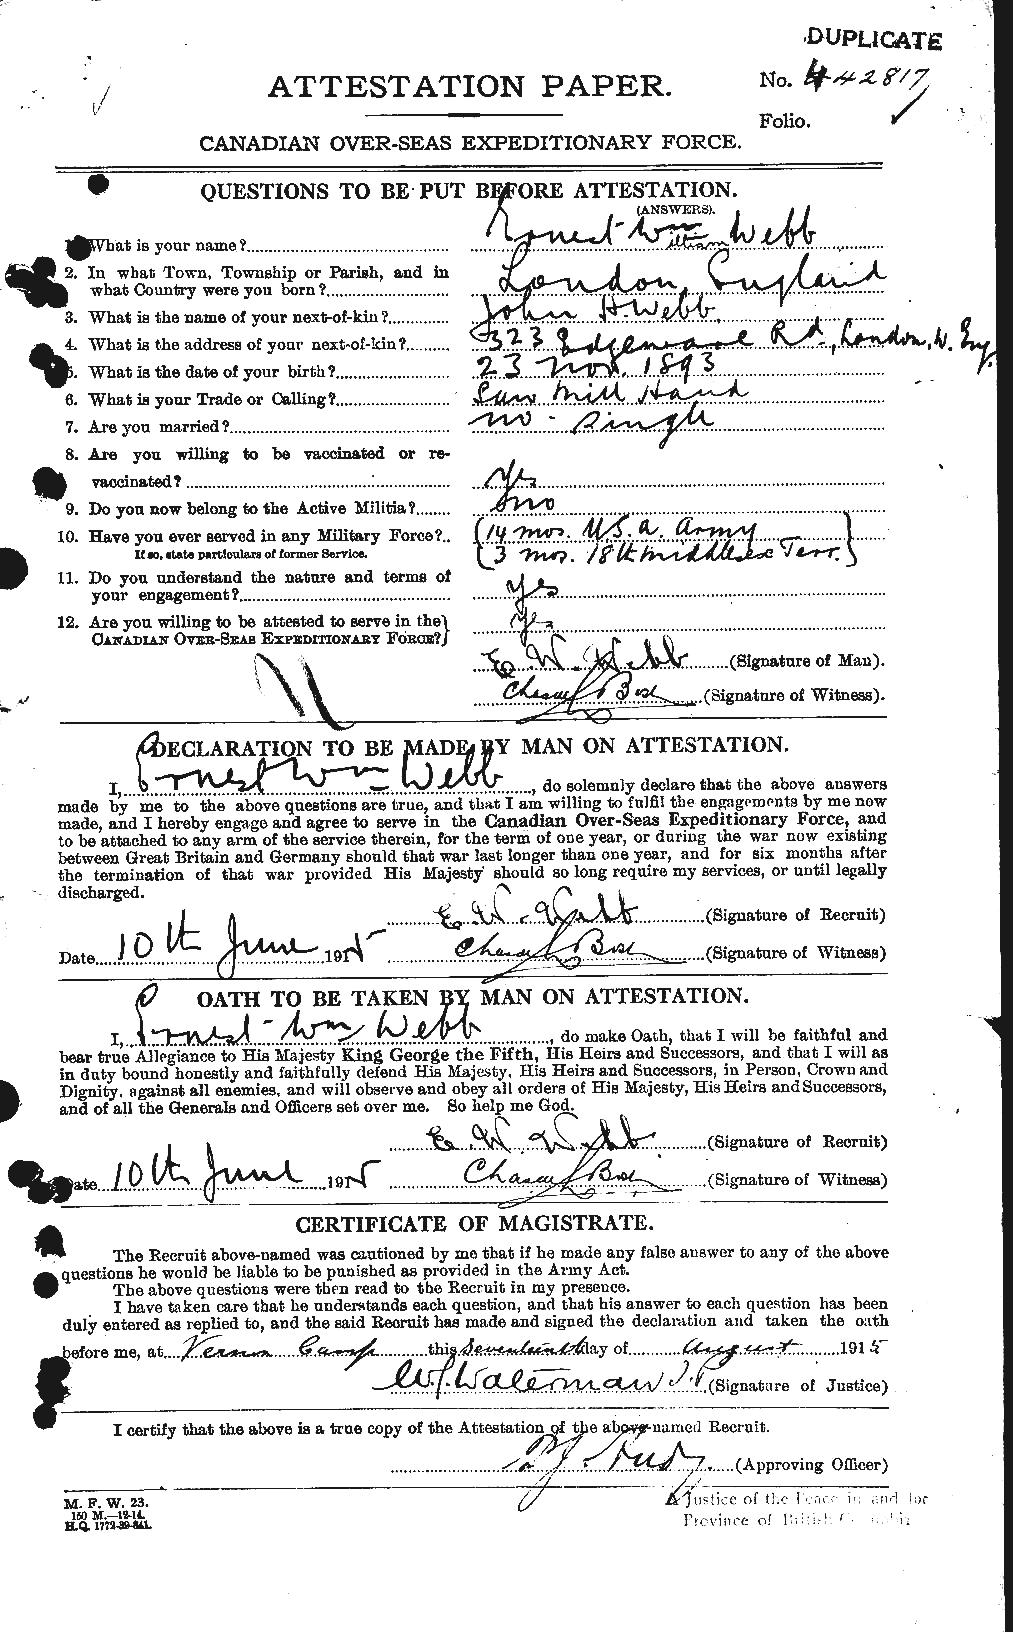 Personnel Records of the First World War - CEF 661767a